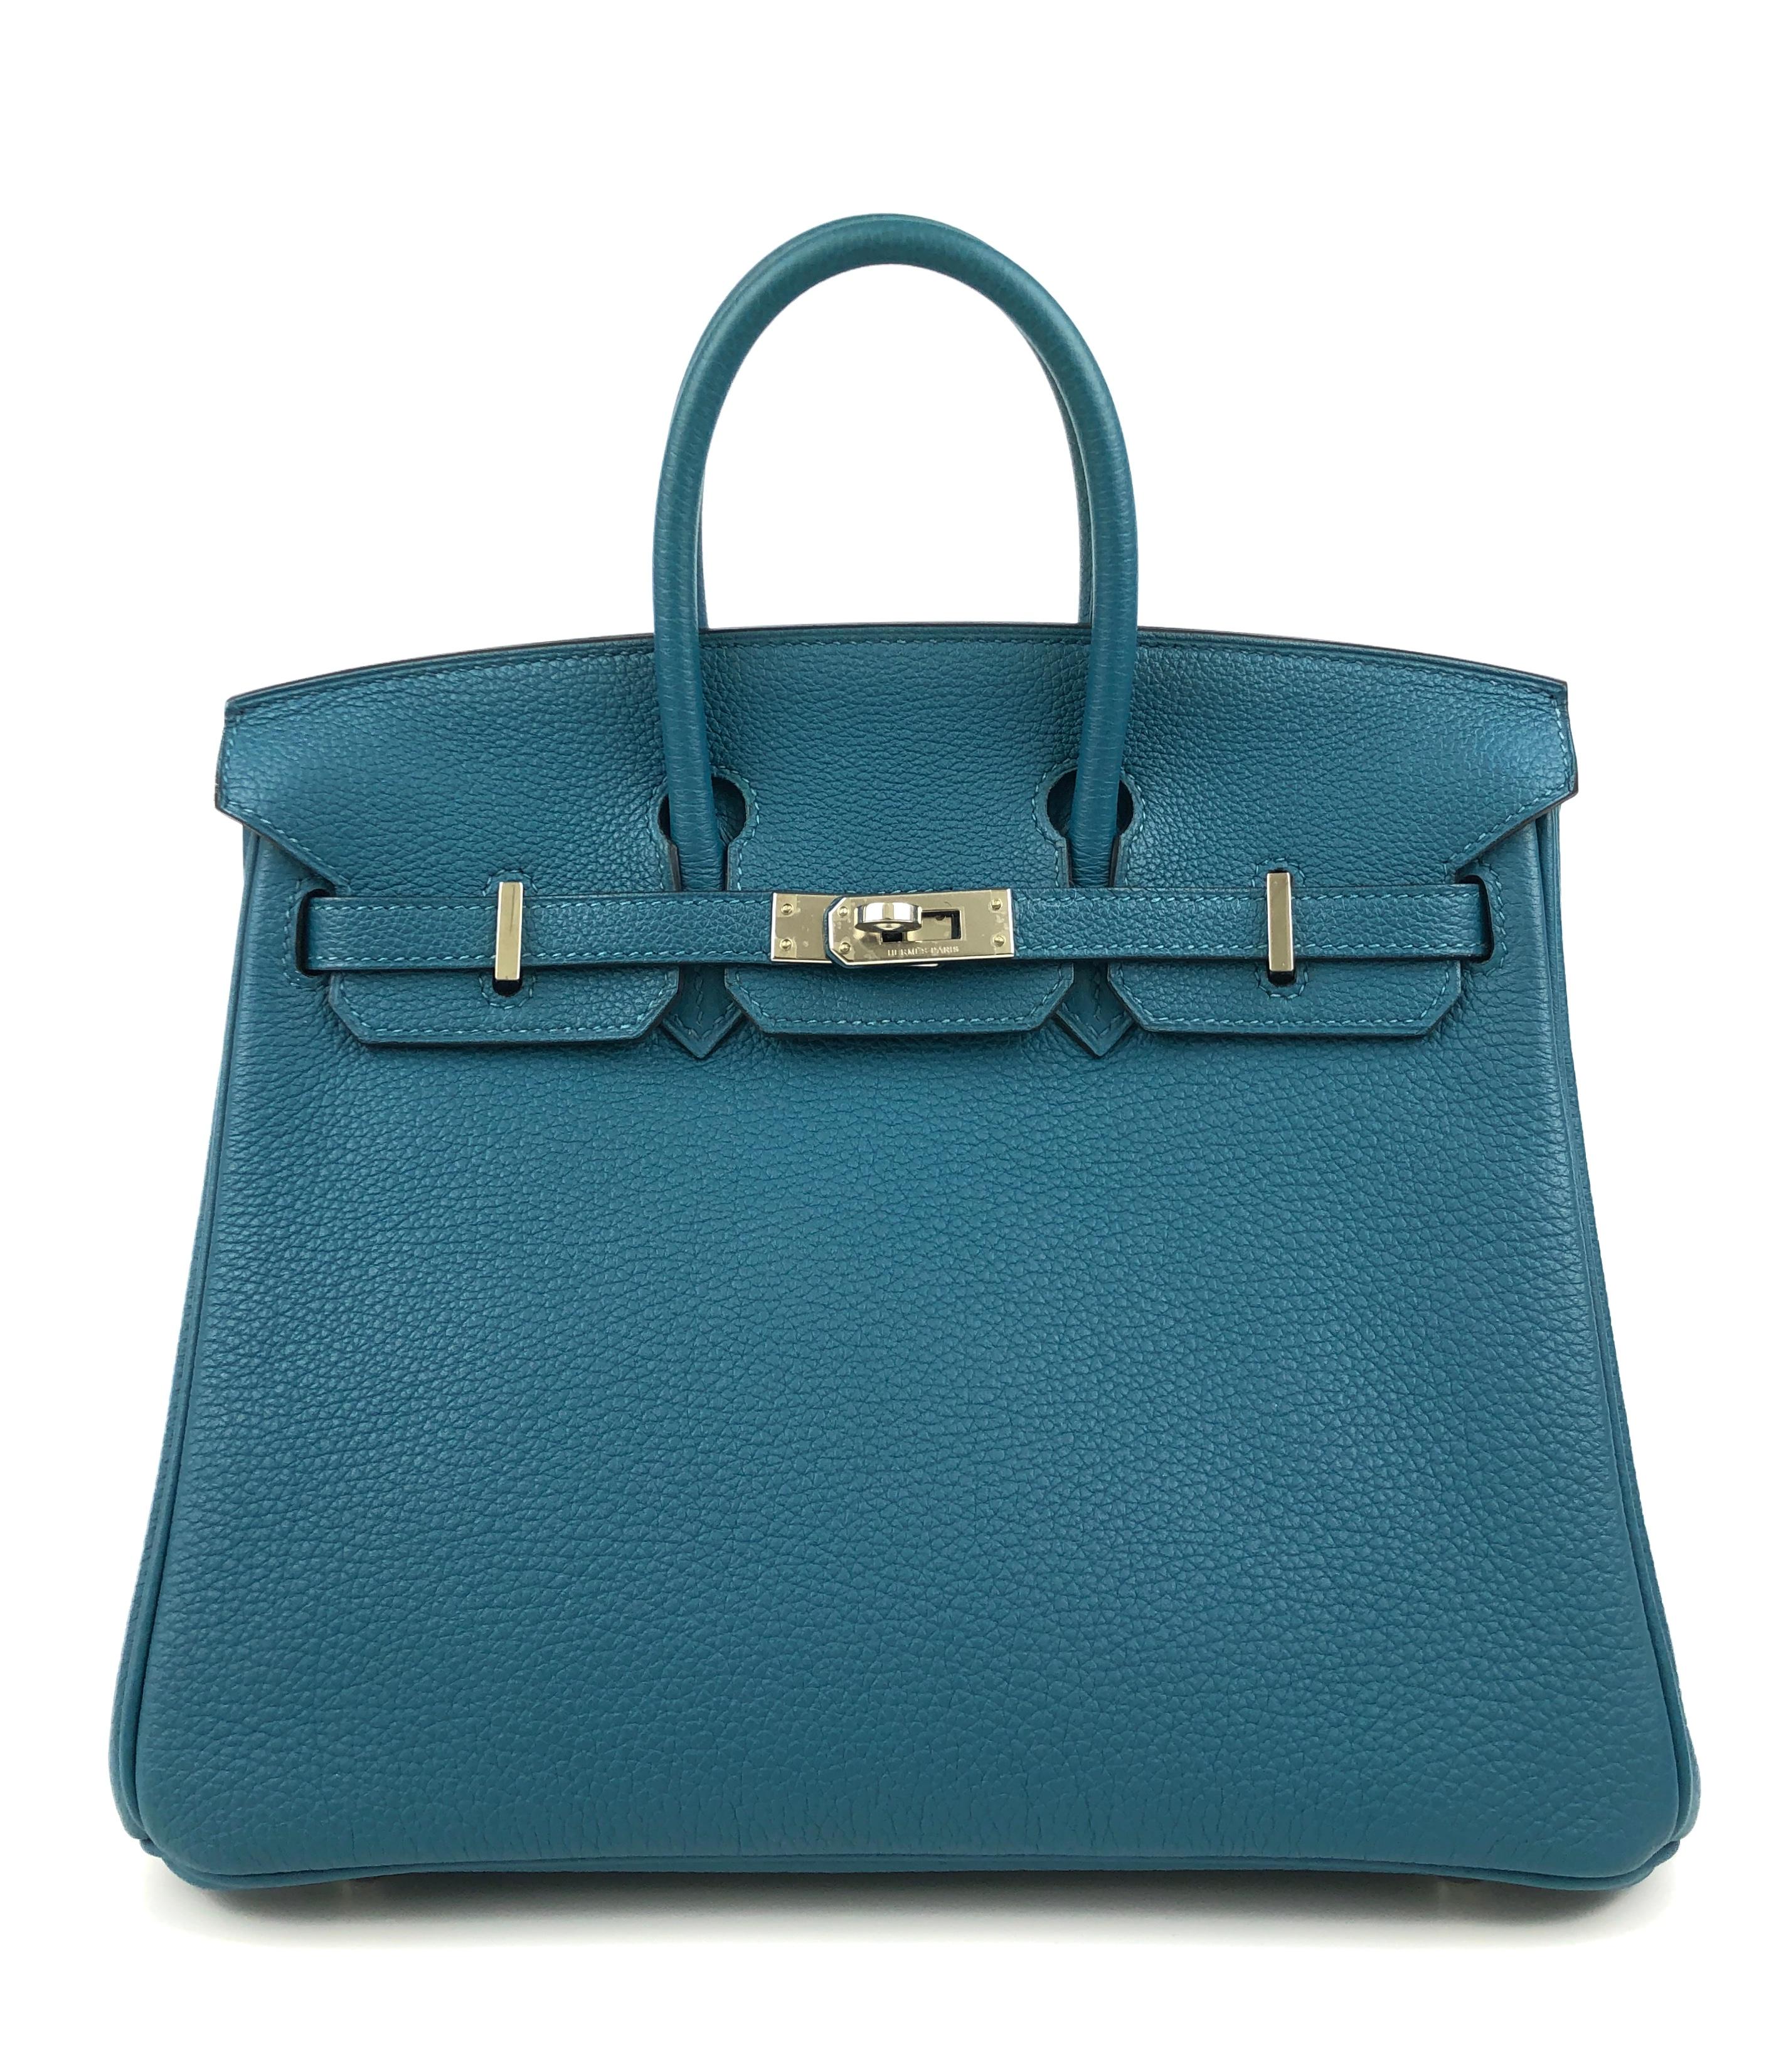 Very Rare and the Only ONE on eBay! Hermes Birkin 25 Blue Colvert Togo Leather Palladium Hardware. Pristine Condition with Plastic on Hardware, perfect corners and structure. 2017 A Stamp.

Shop With Confidence from Lux Addicts. Authenticity